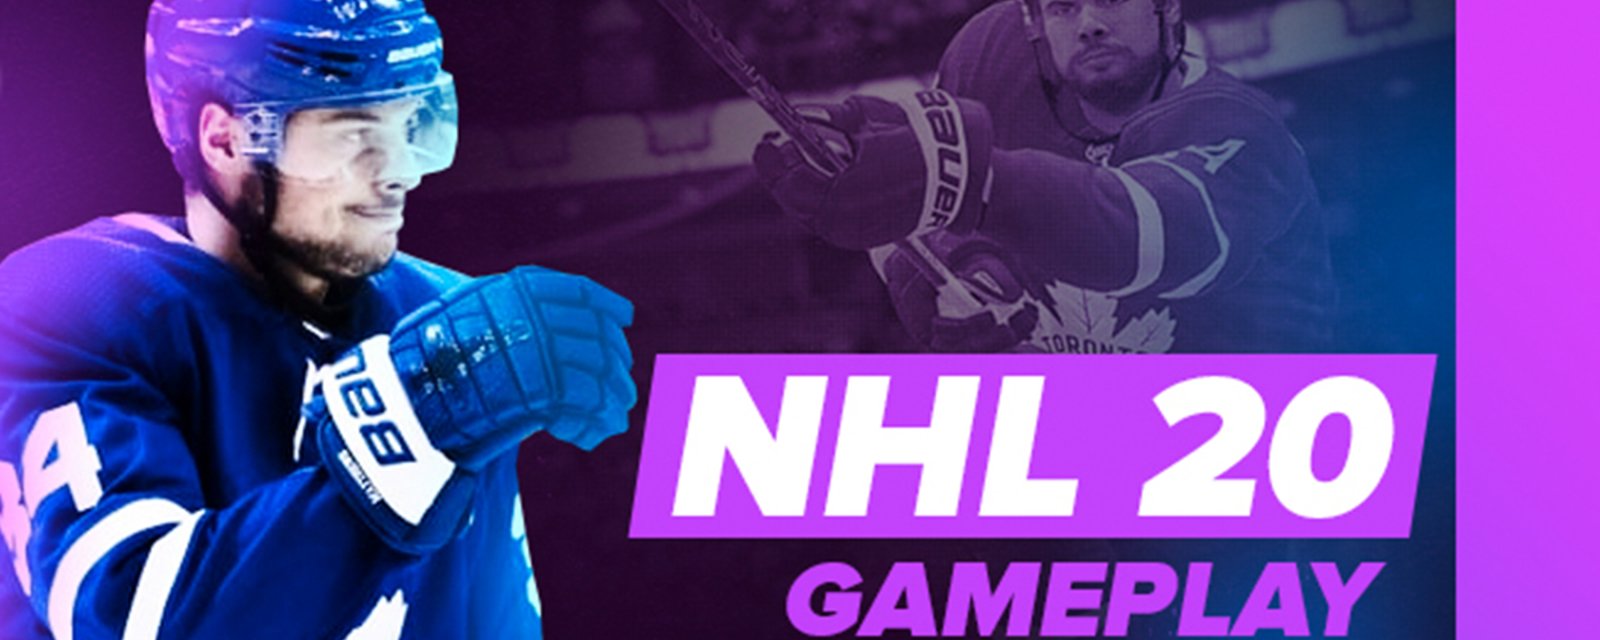 EA Sports drops official NHL 20 gameplay trailer